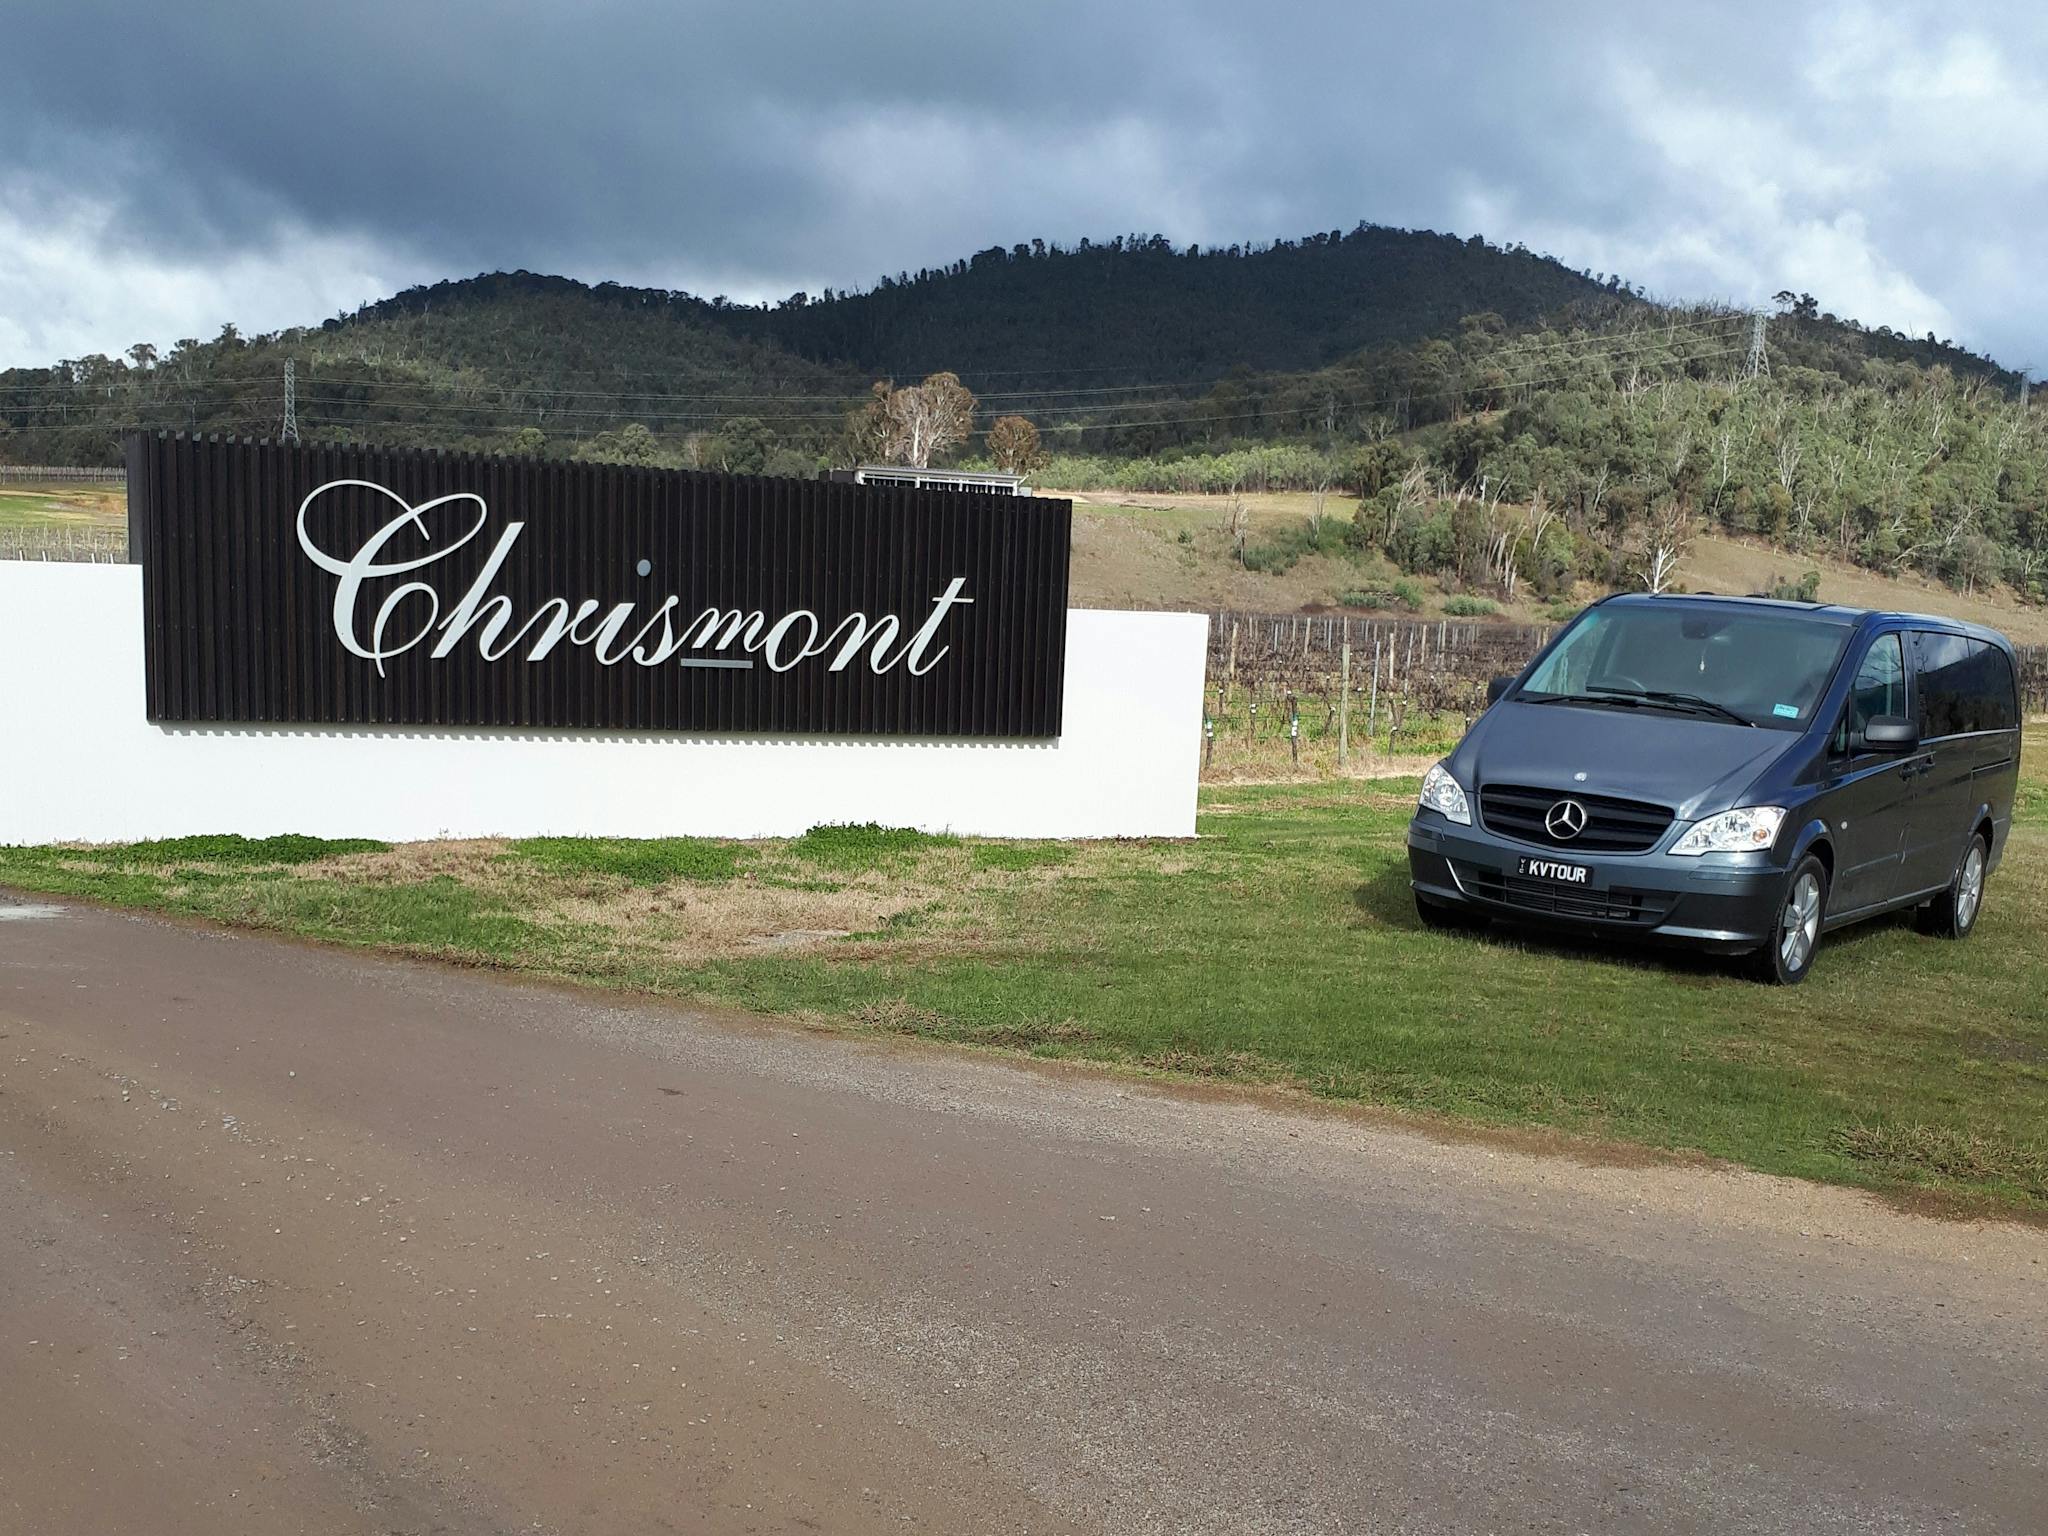 Wine tasting and gourmet lunch option at Chrismont